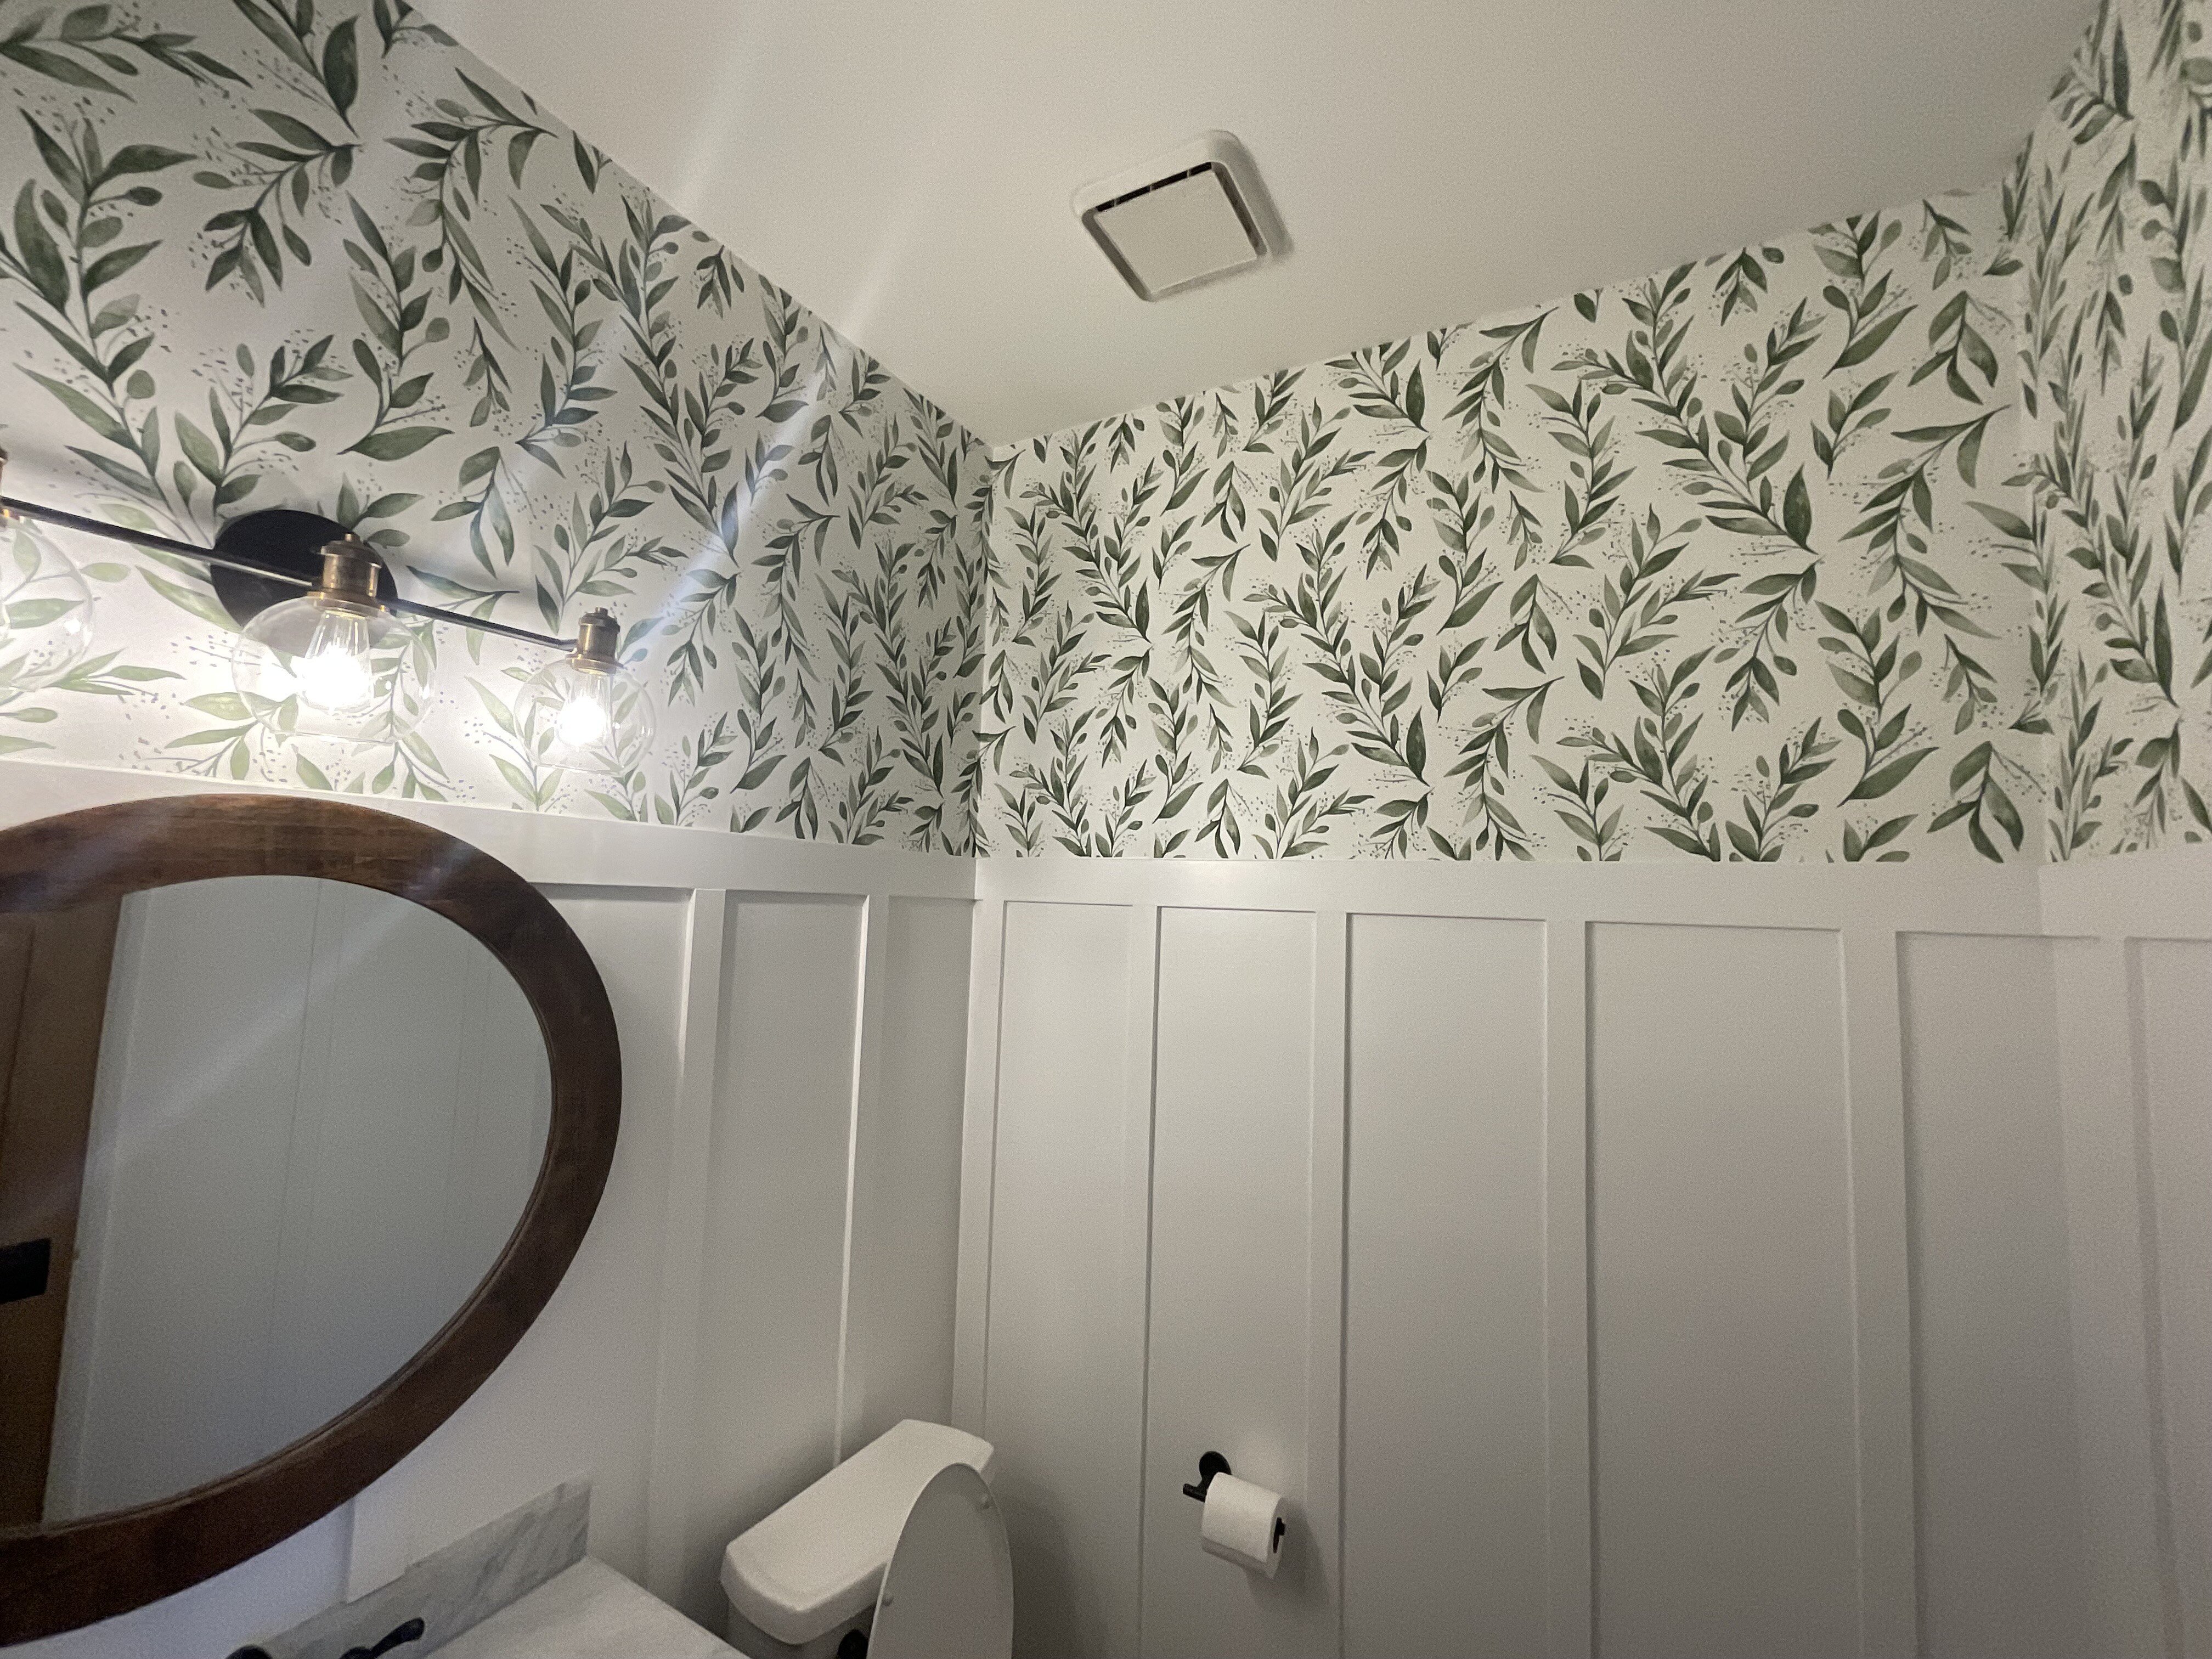 Bathroom with wallpaper on upper half and board and batten on lower half painted white.